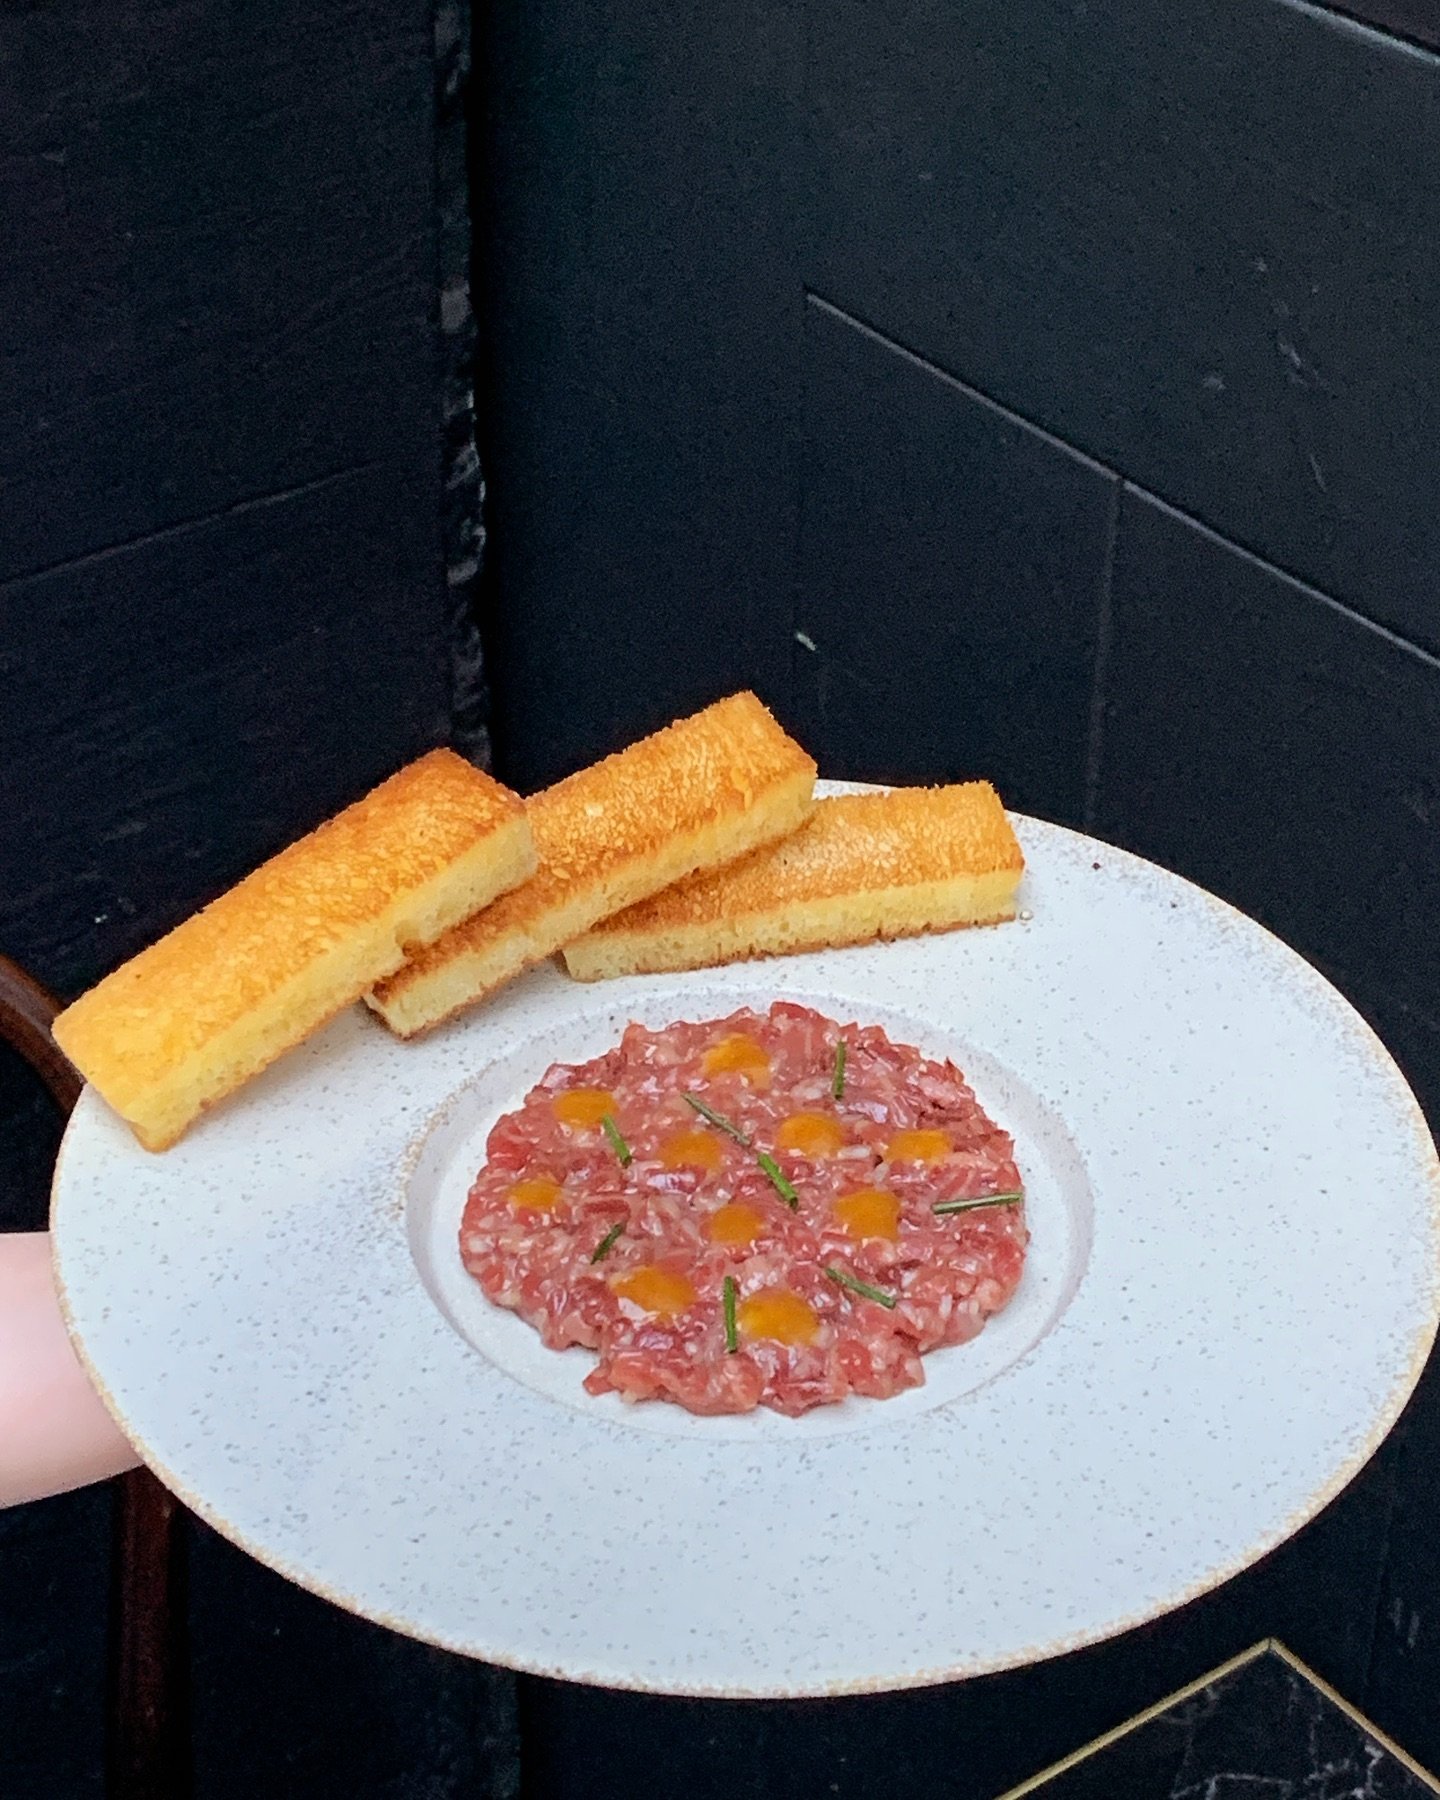 Kicking off at Kahii with something special: Kagoshima Wagyu Tartare, served up with egg yolk, jam, and shokupan. 

Straight from our sister venue&rsquo;s kitchen to your table &ndash; it&lsquo;s the kind of dish that turns an ordinary night into a &